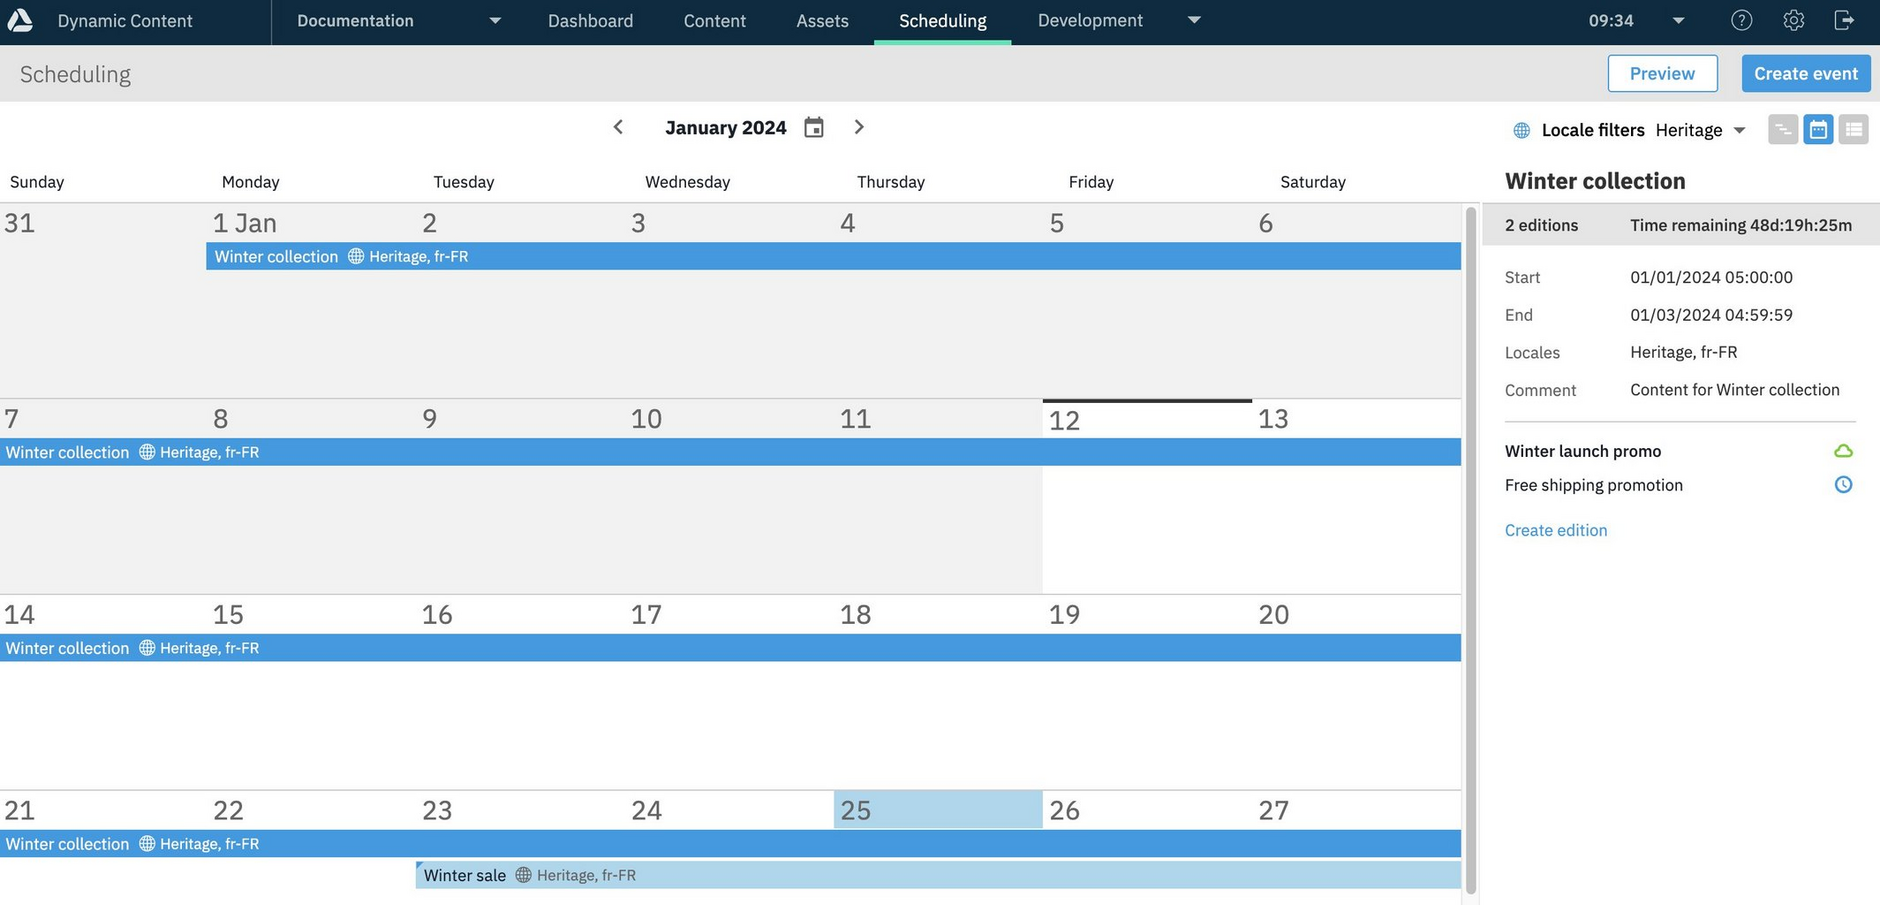 Events and editions in the scheduling view